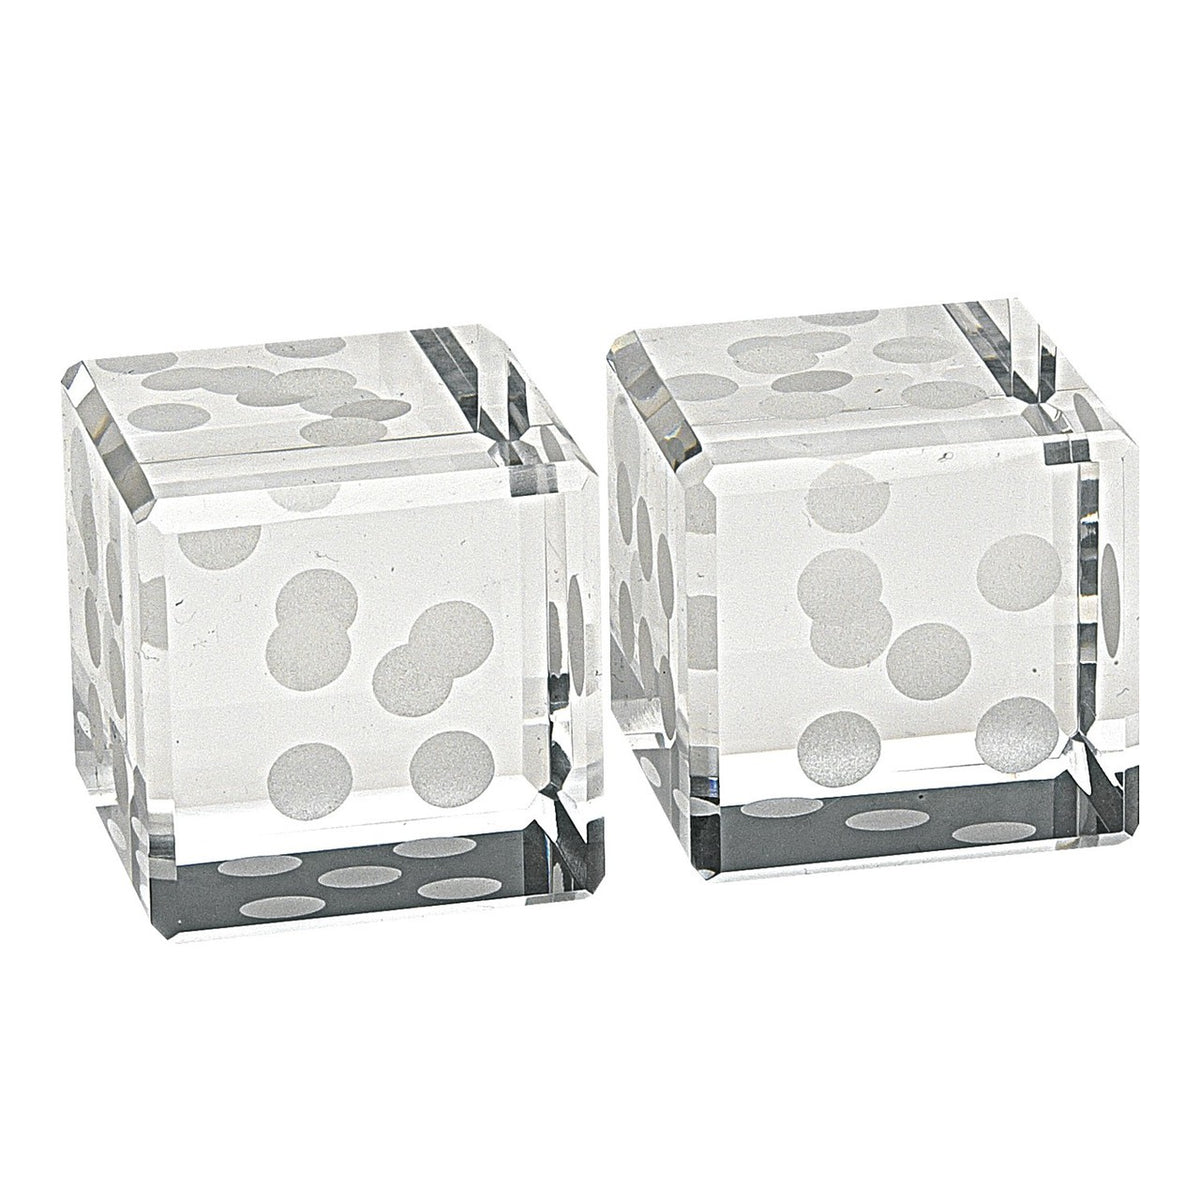 Crystal Glass Pair of Dice